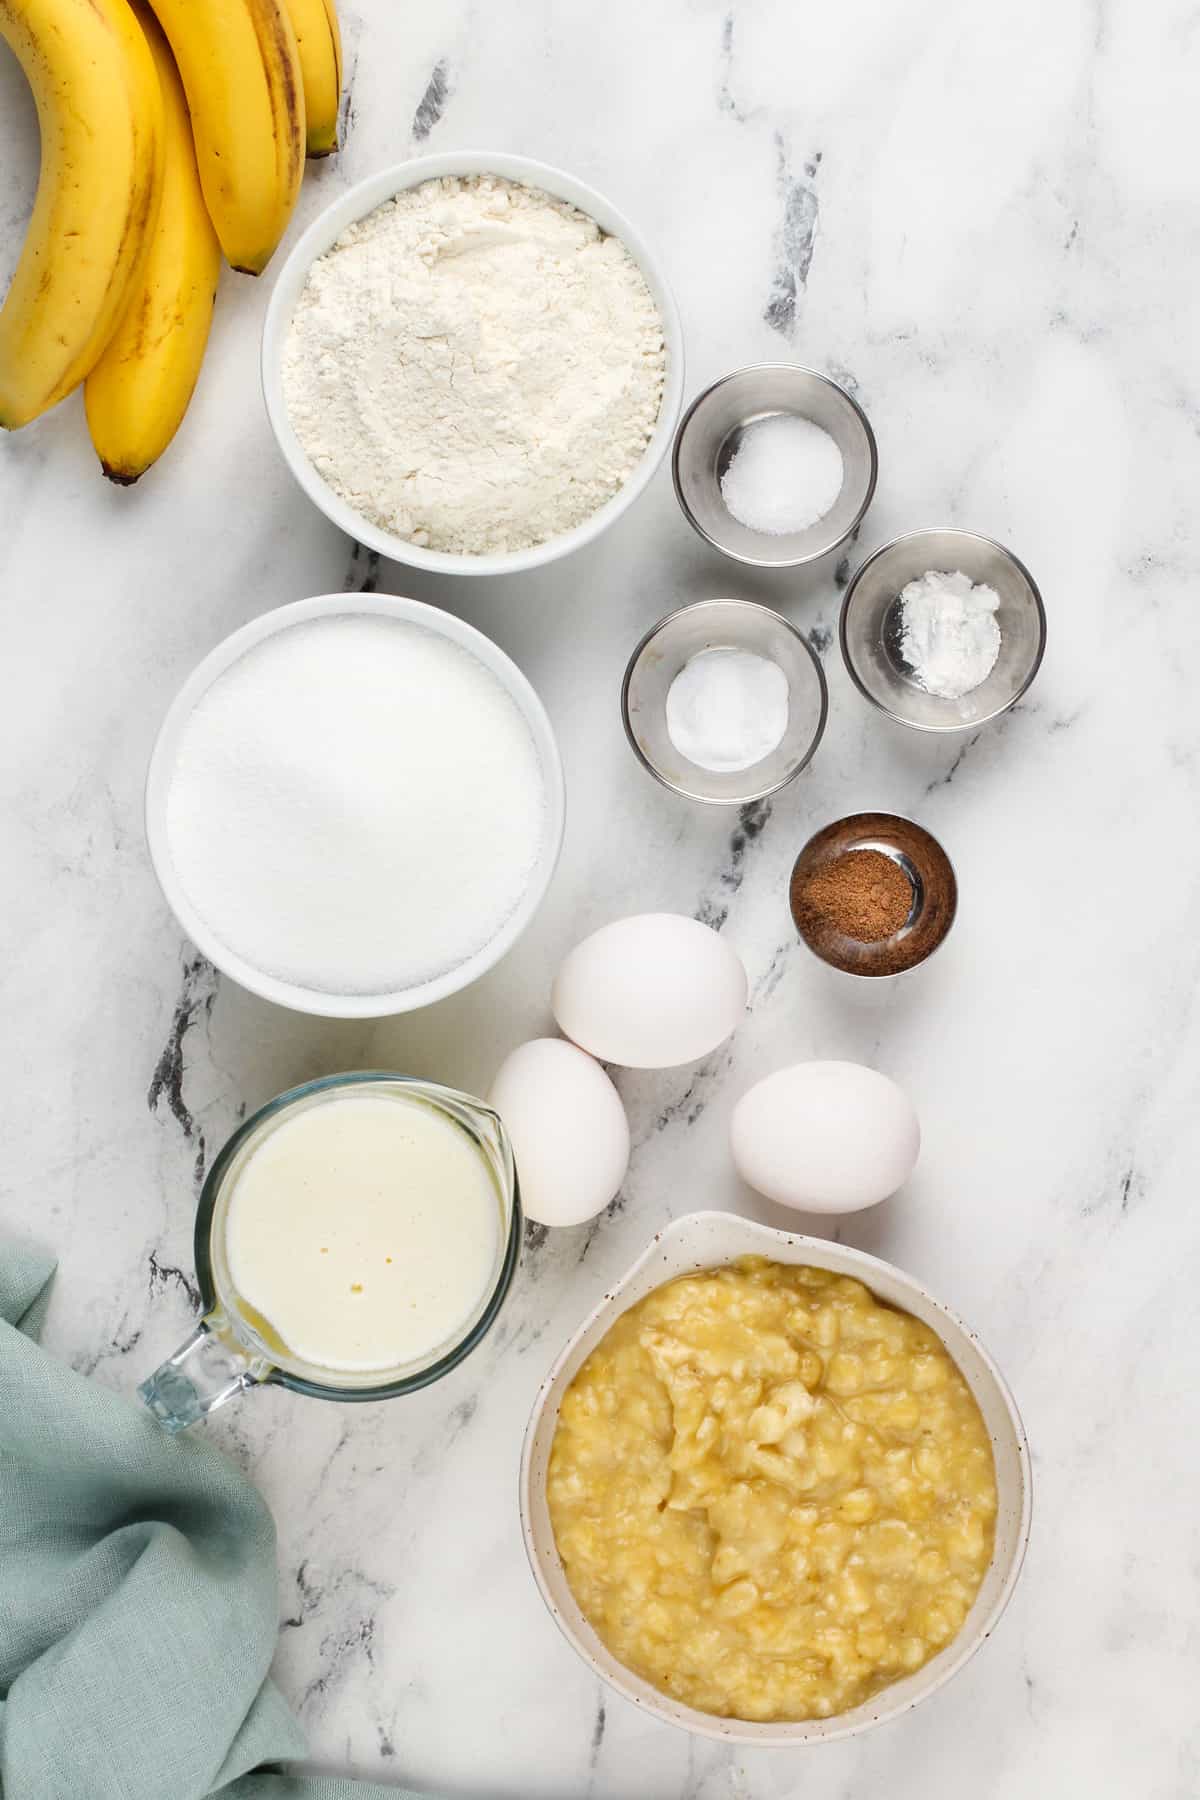 Ingredients for dominique ansel's banana bread arranged on a marble countertop.